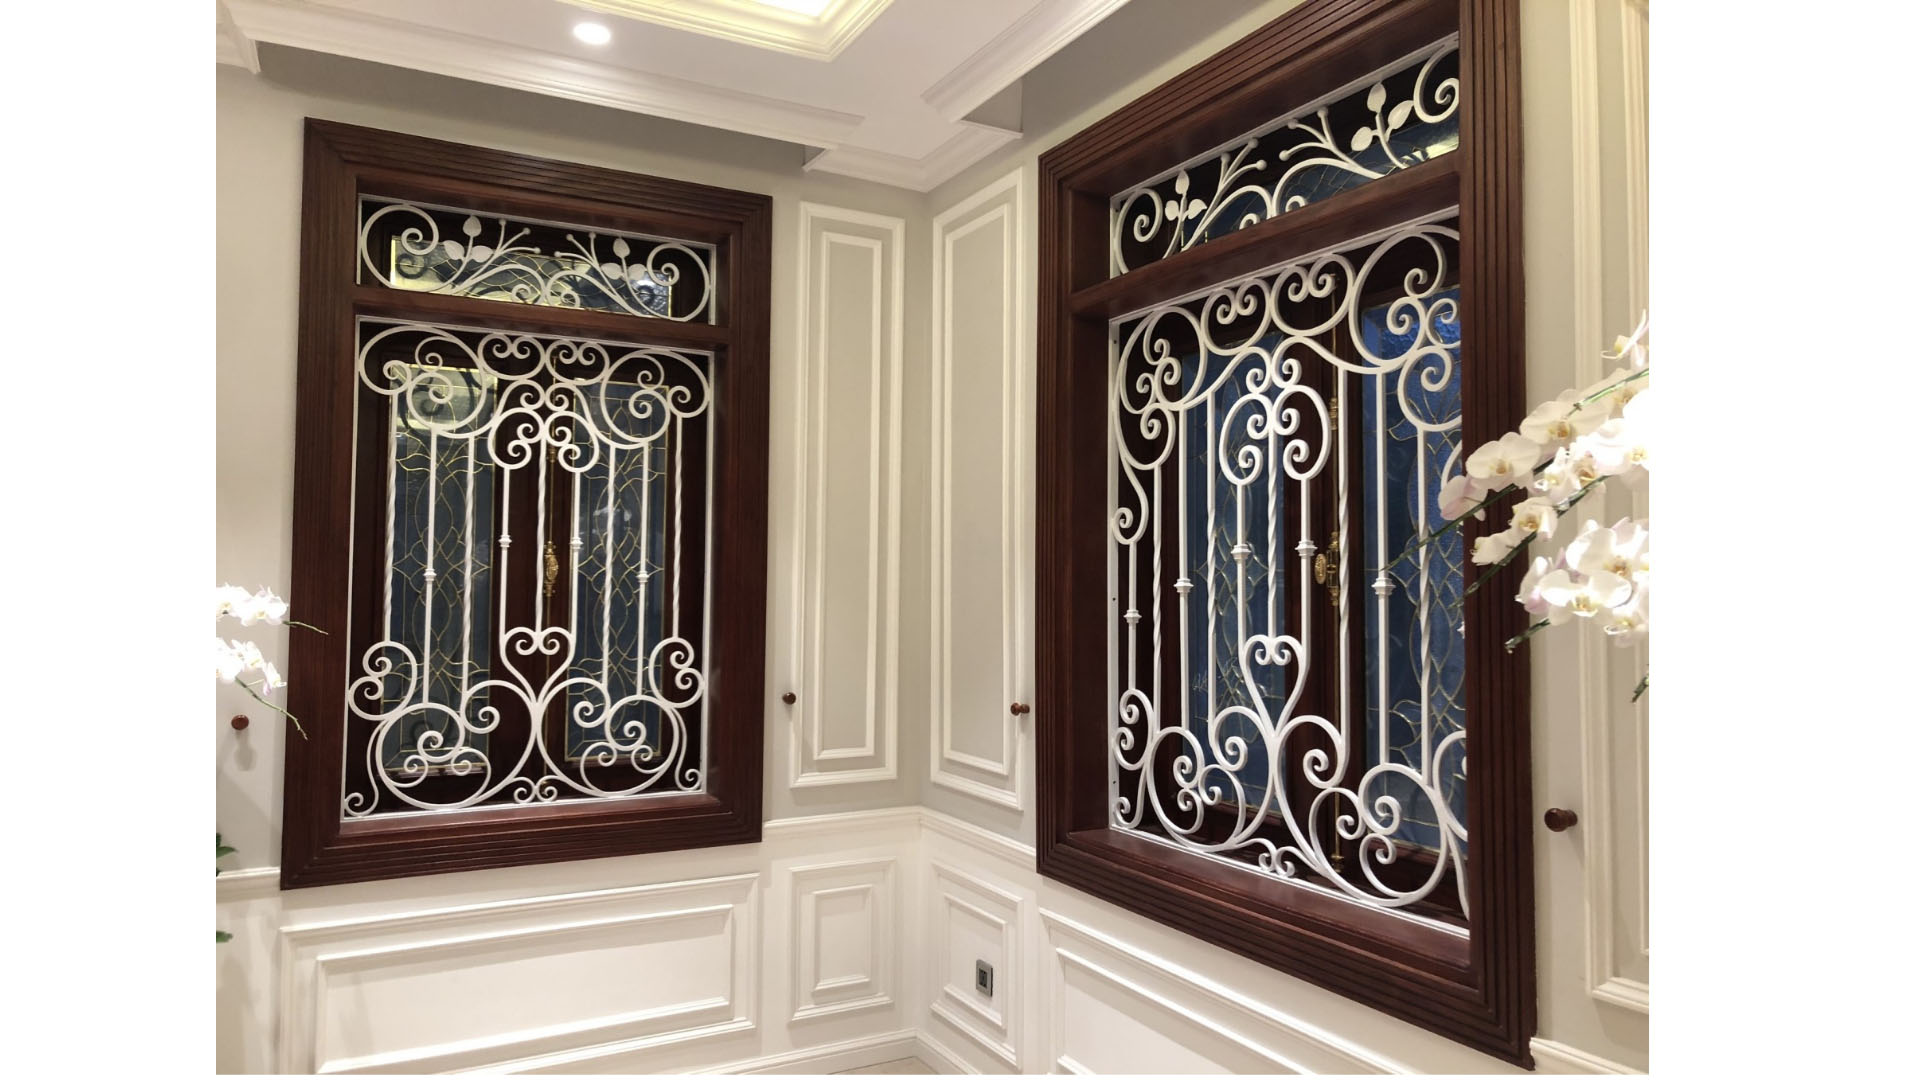 https://nguyenphongcnc.com/assets/images/gallery/wrought-iron-grille-wrought-iron-window-grill.jpg